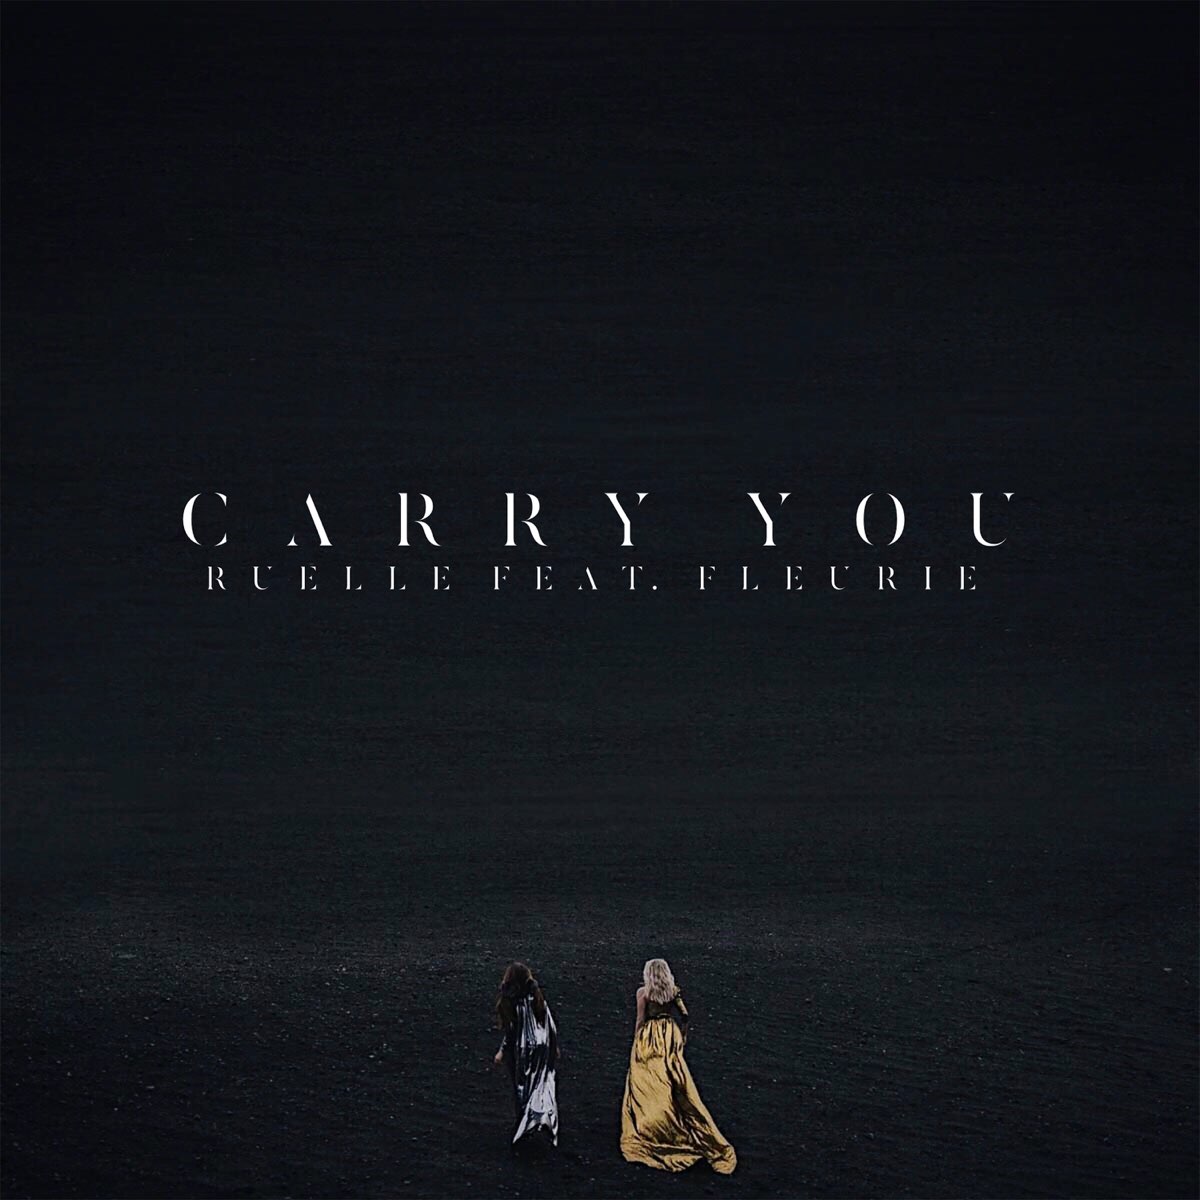 Carry You (feat. Fleurie) - Single by Ruelle on Apple Music